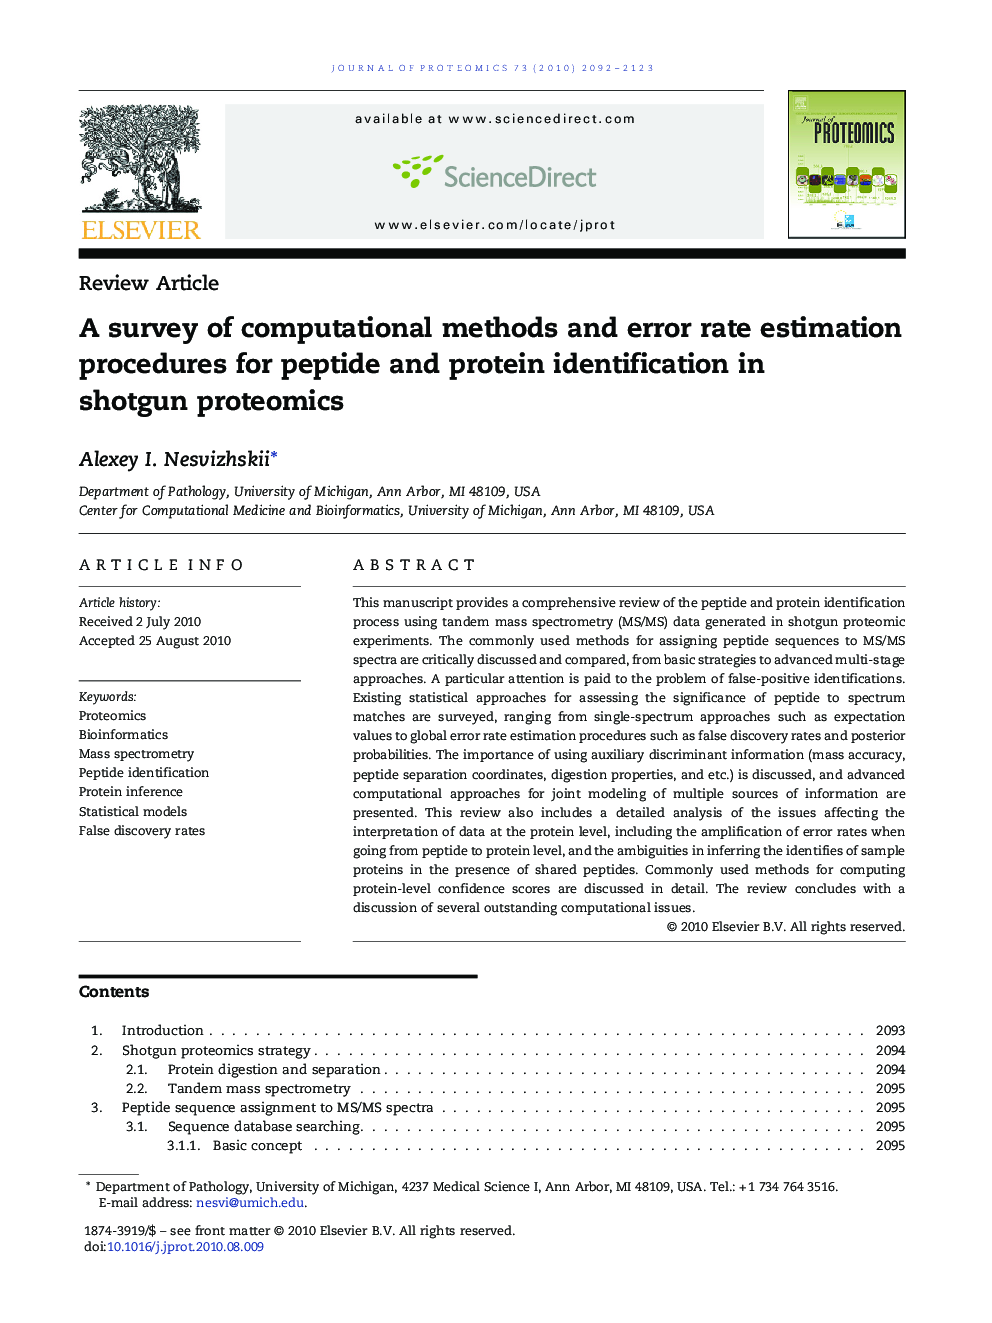 A survey of computational methods and error rate estimation procedures for peptide and protein identification in shotgun proteomics